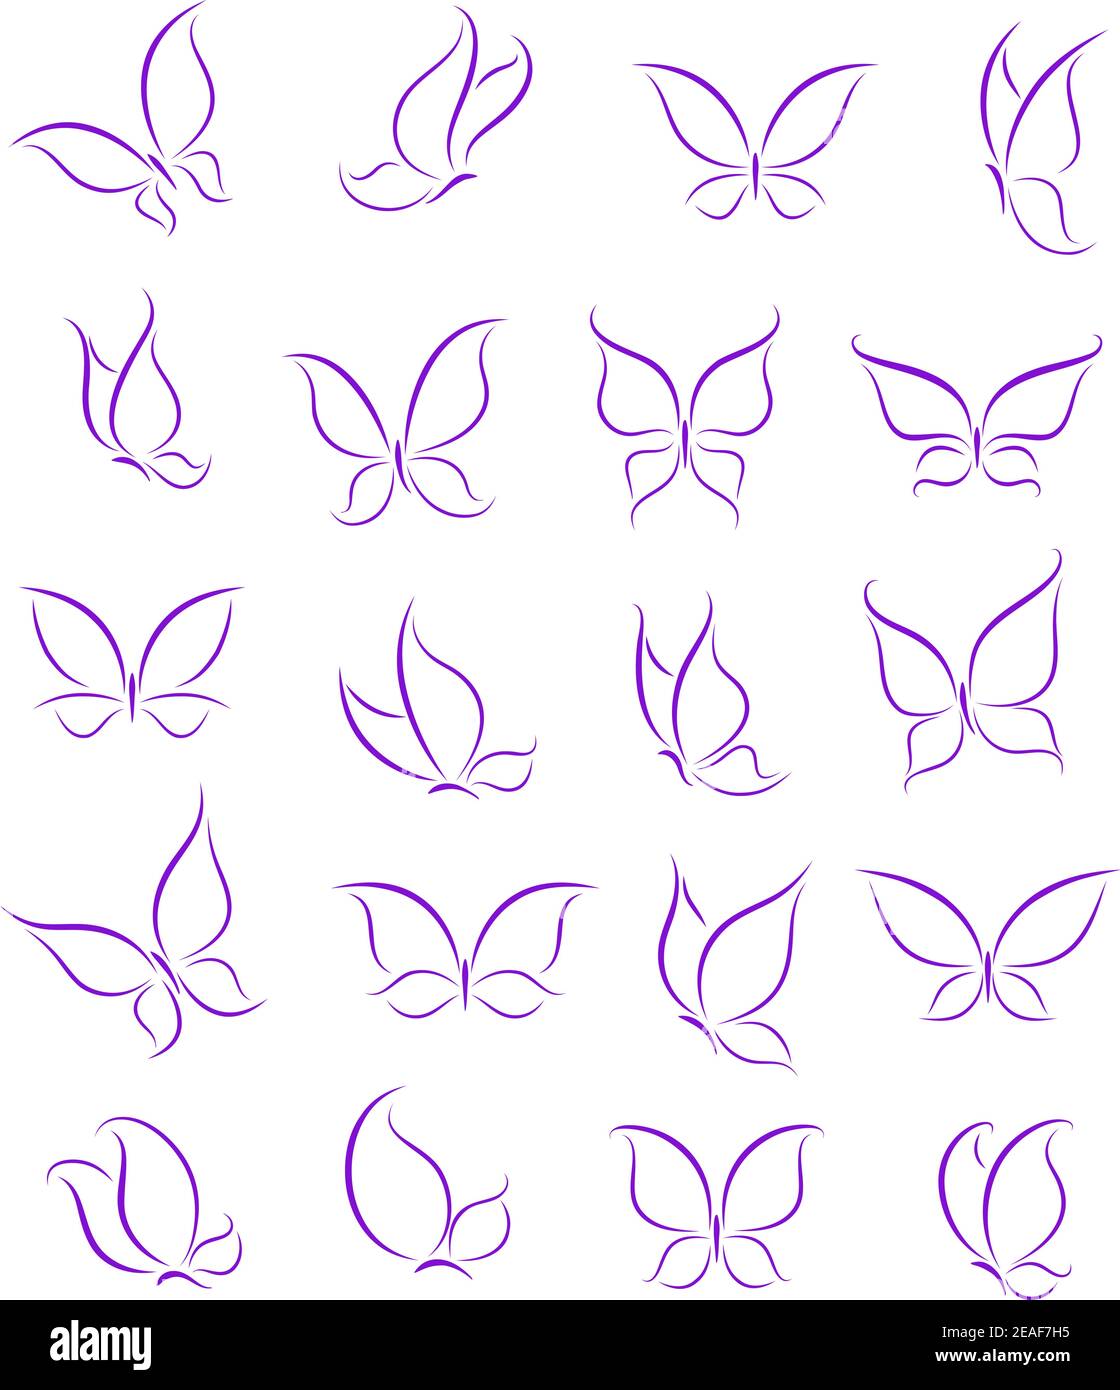 easy butterfly tattoo designs